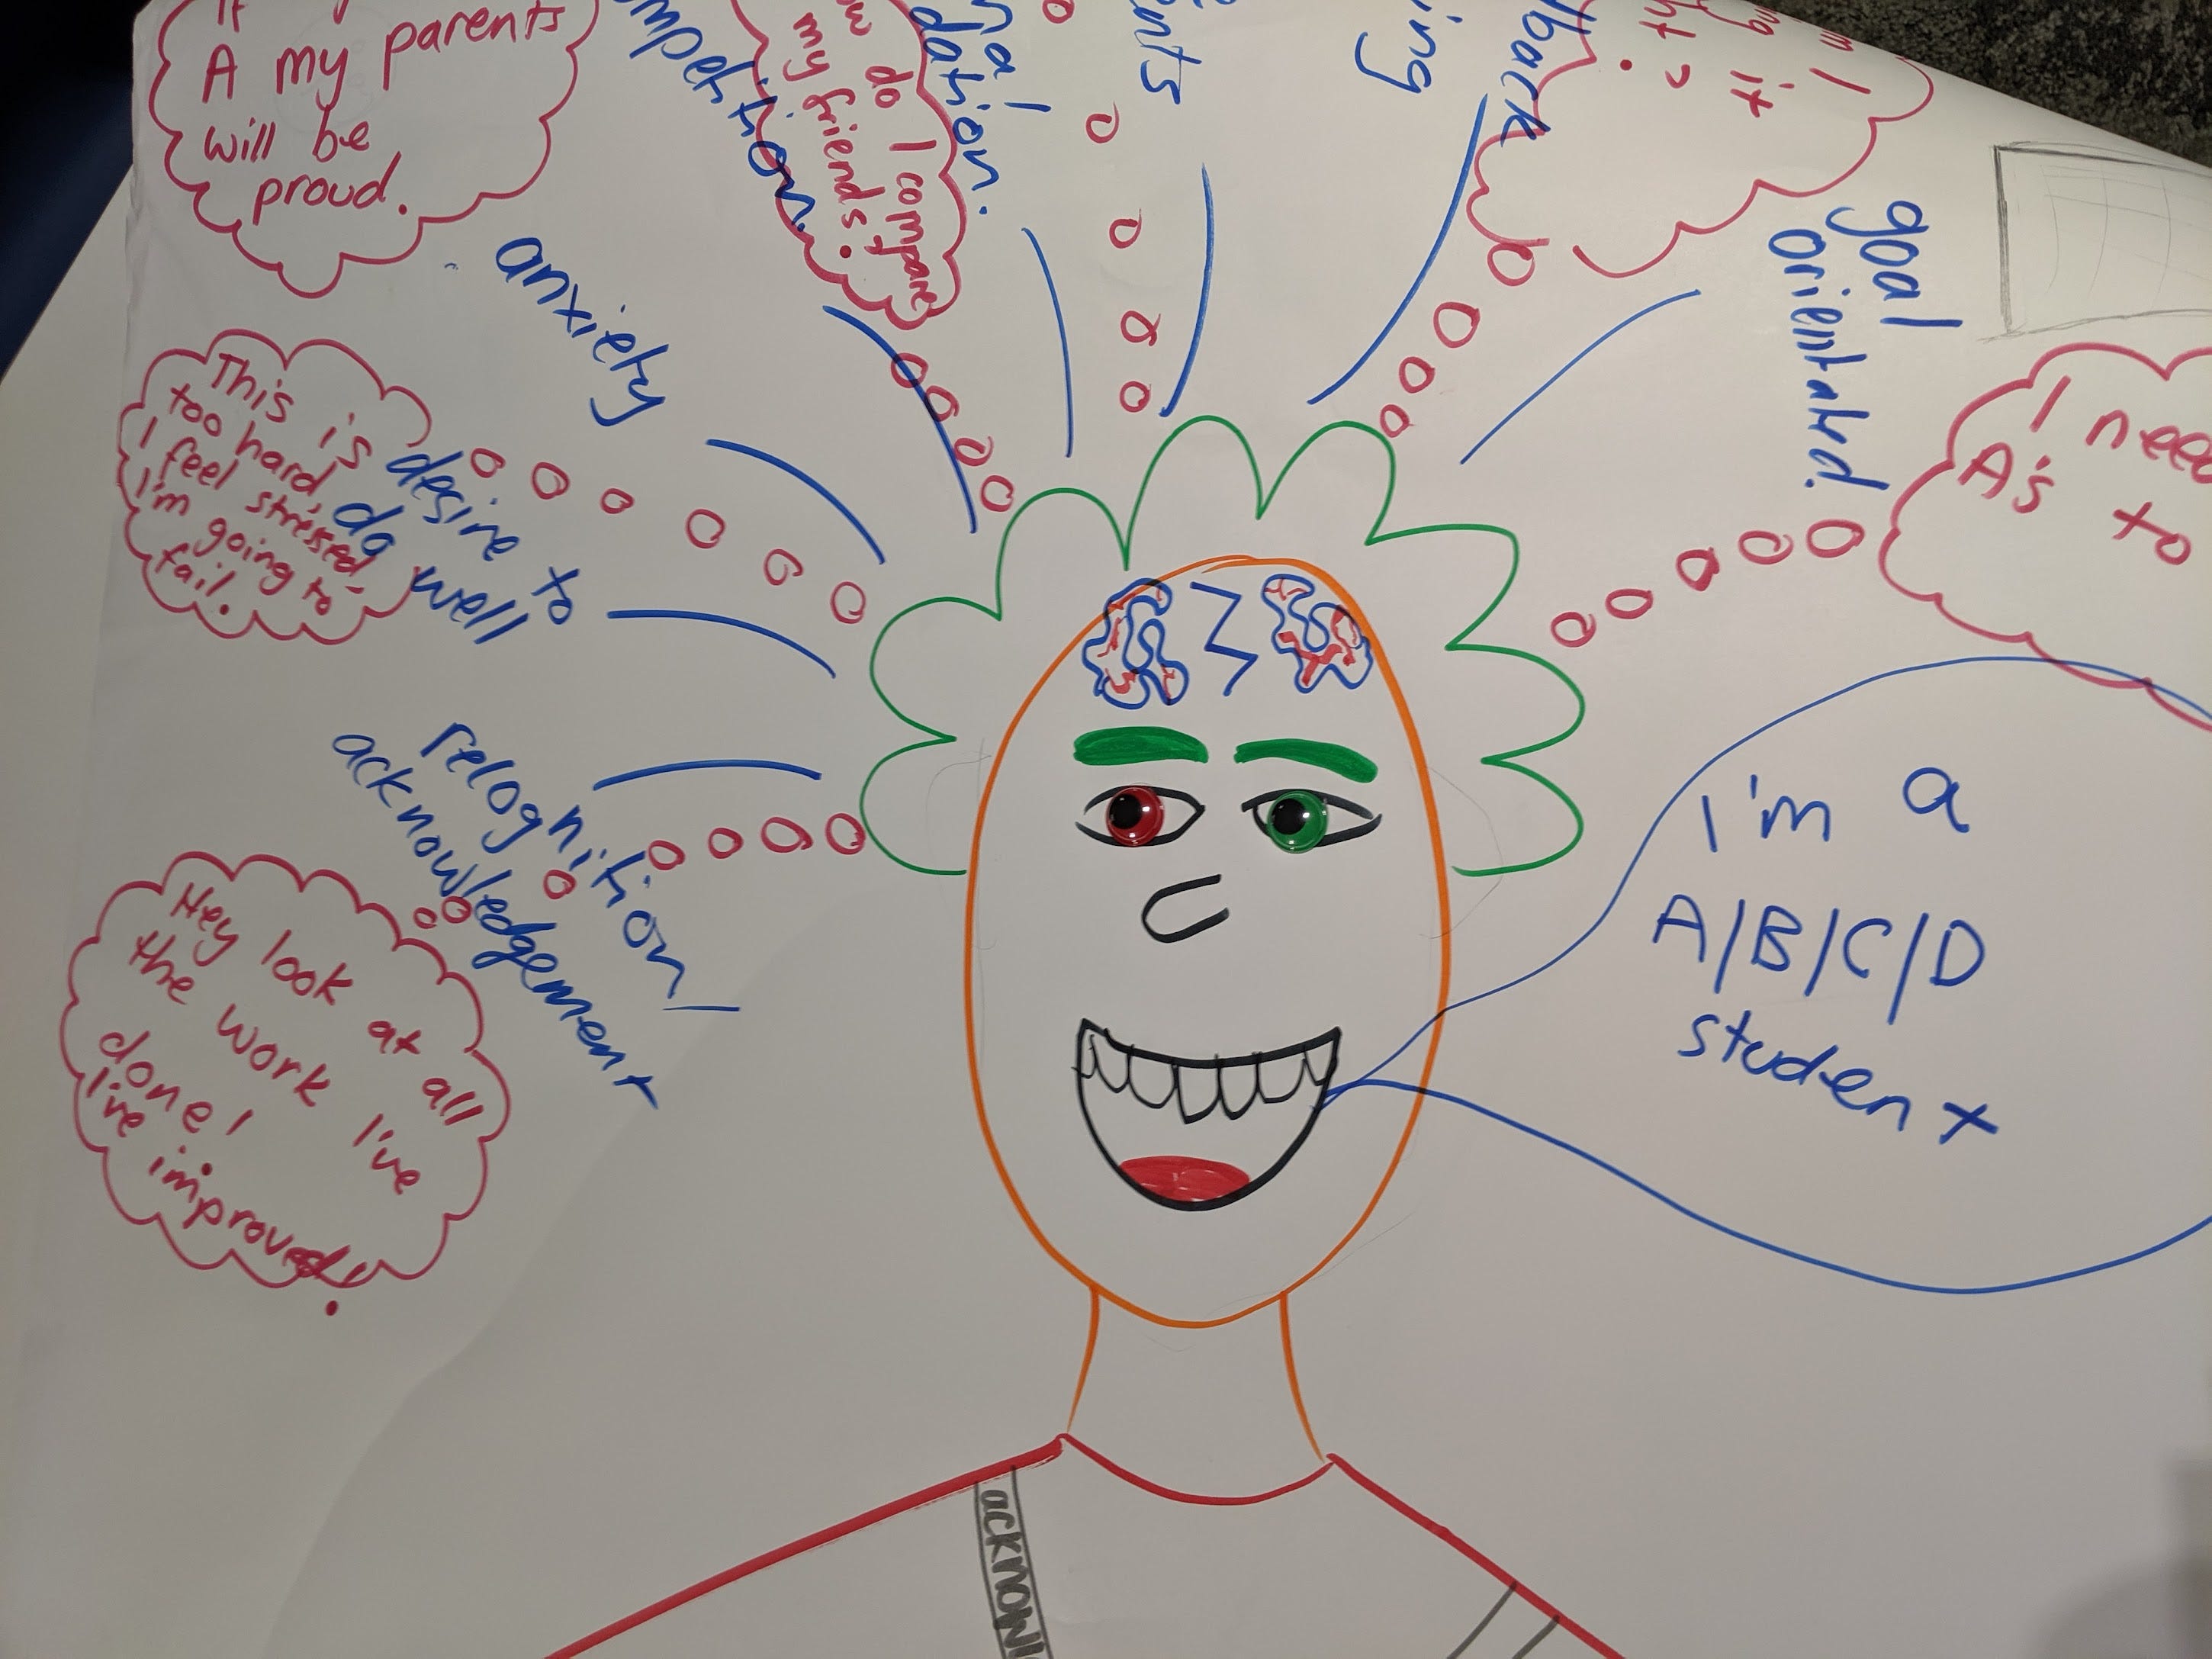 A drawing of a student surrounded by ideas, speech and thought bubbles.